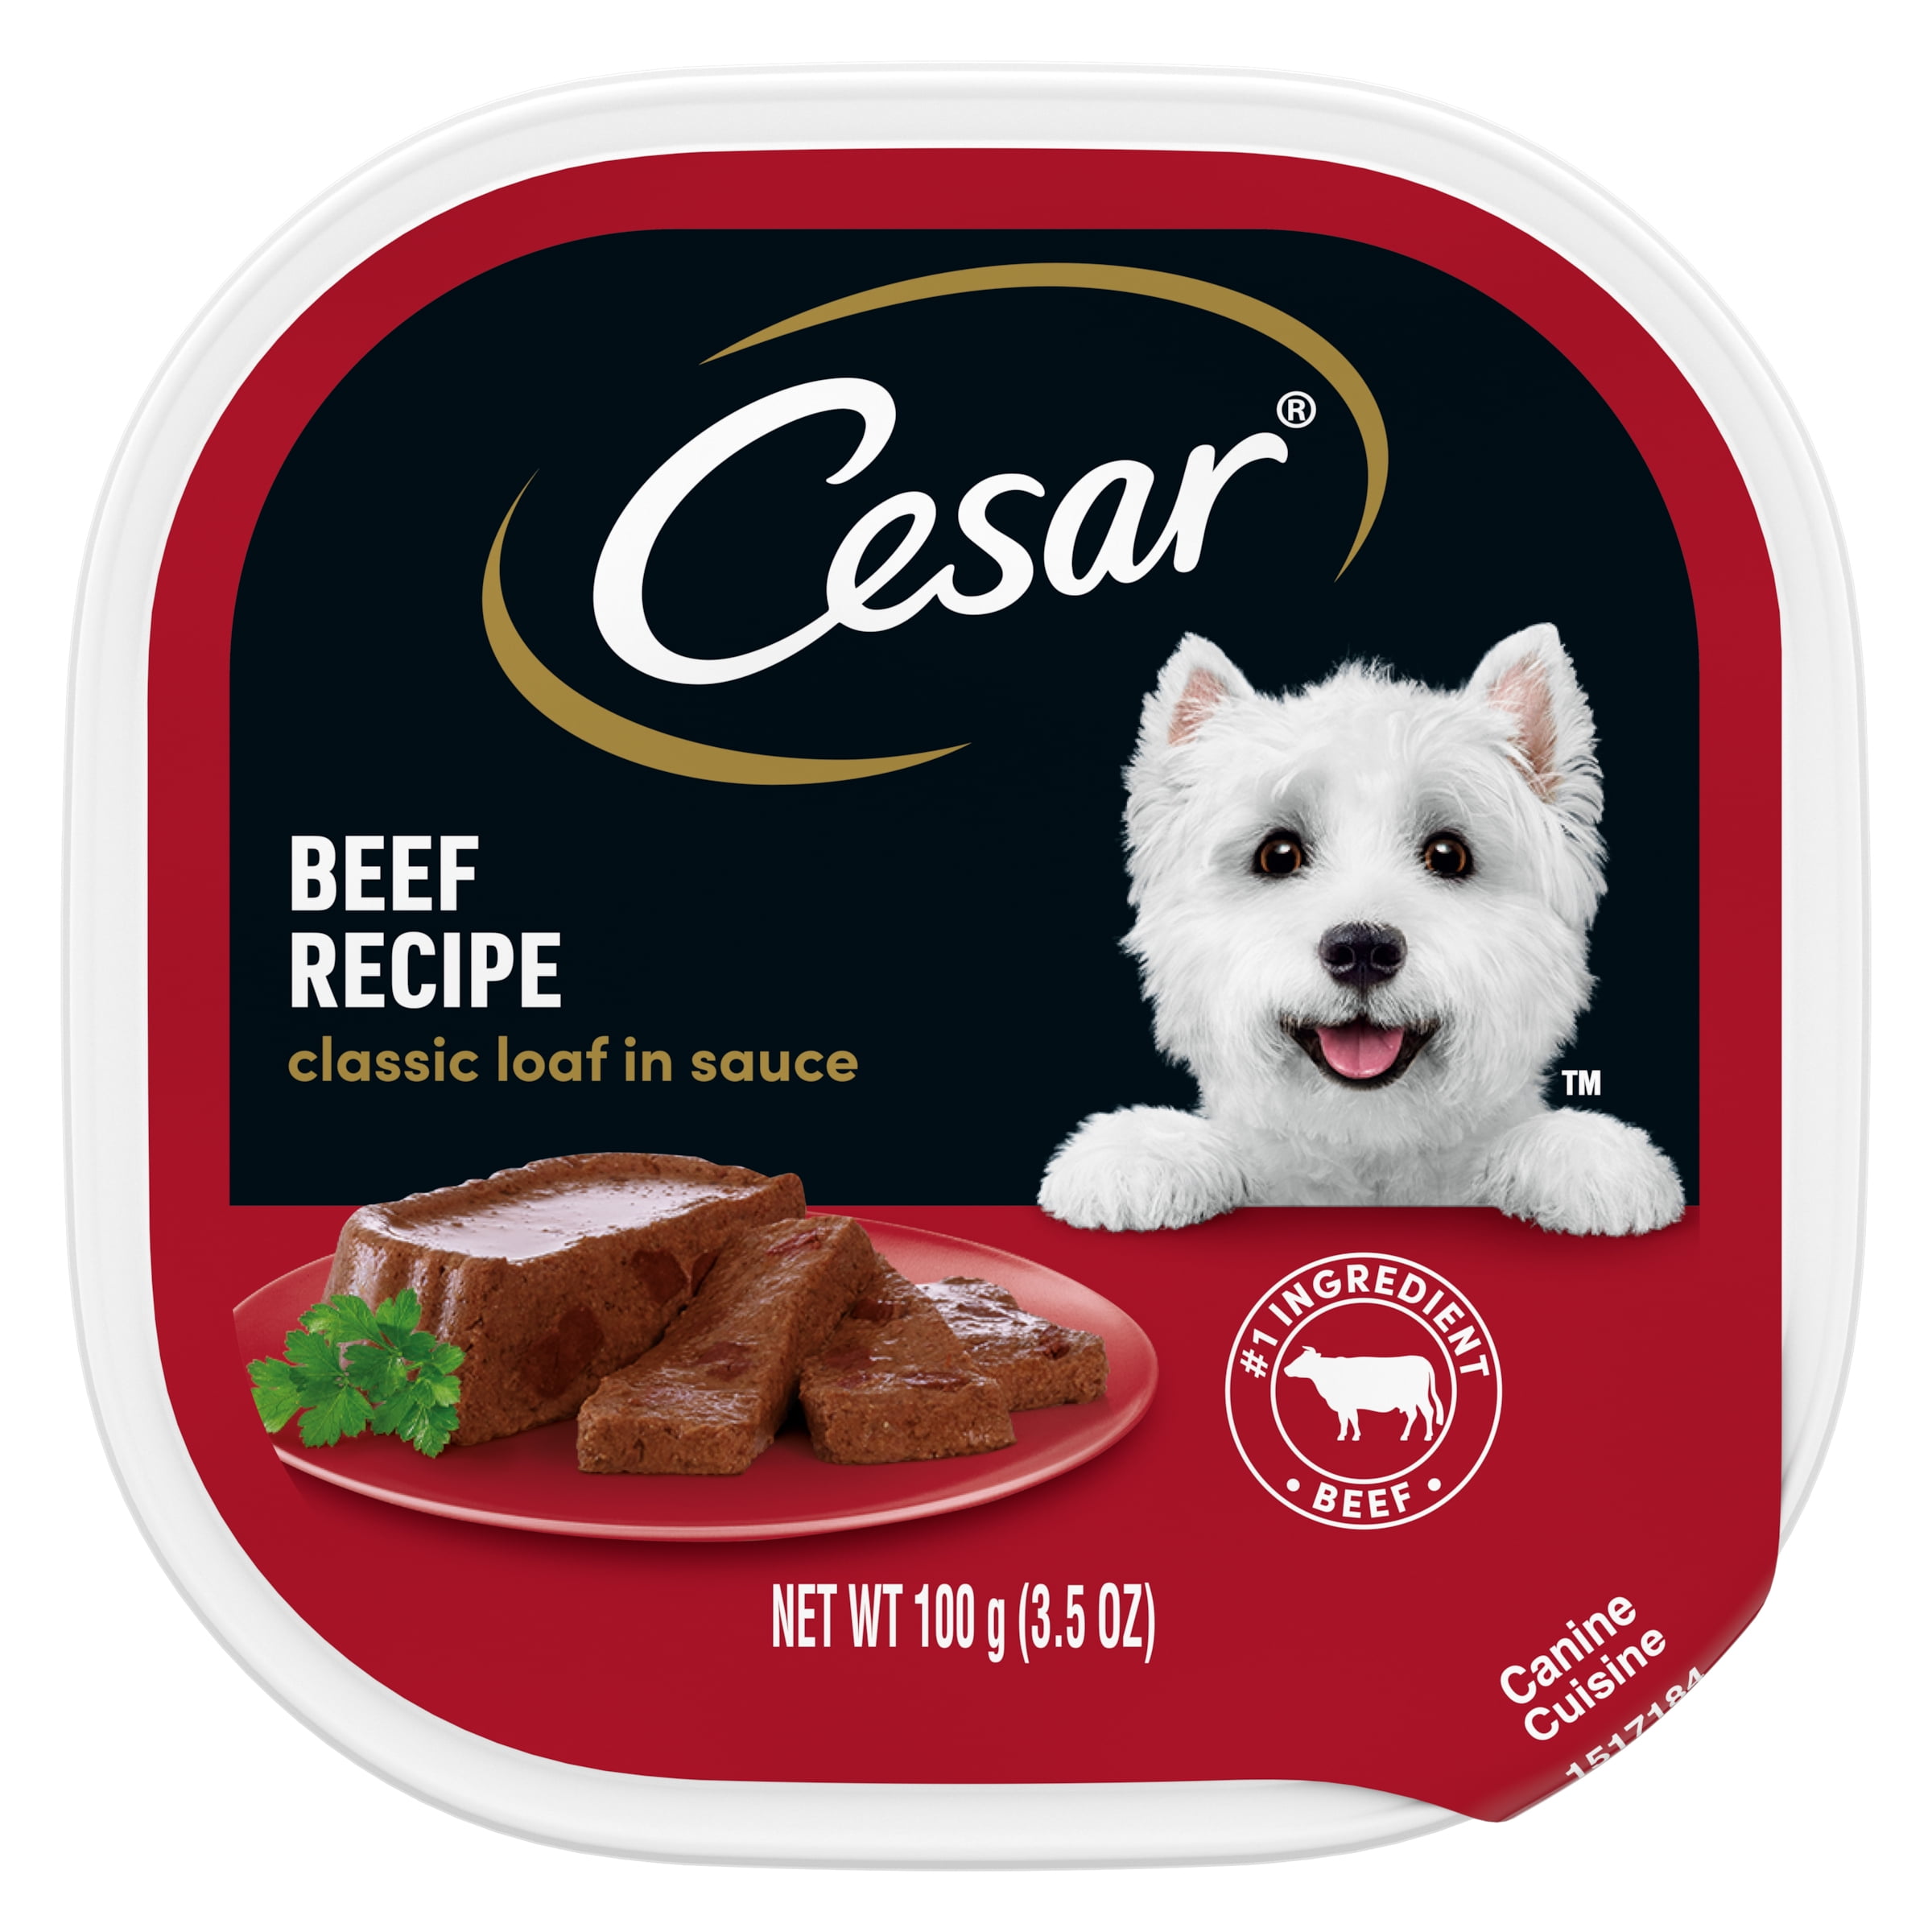 CESAR Classic Loaf in Sauce Beef Flavor Wet Dog Food for Adult Dog, 3.5 oz Tray